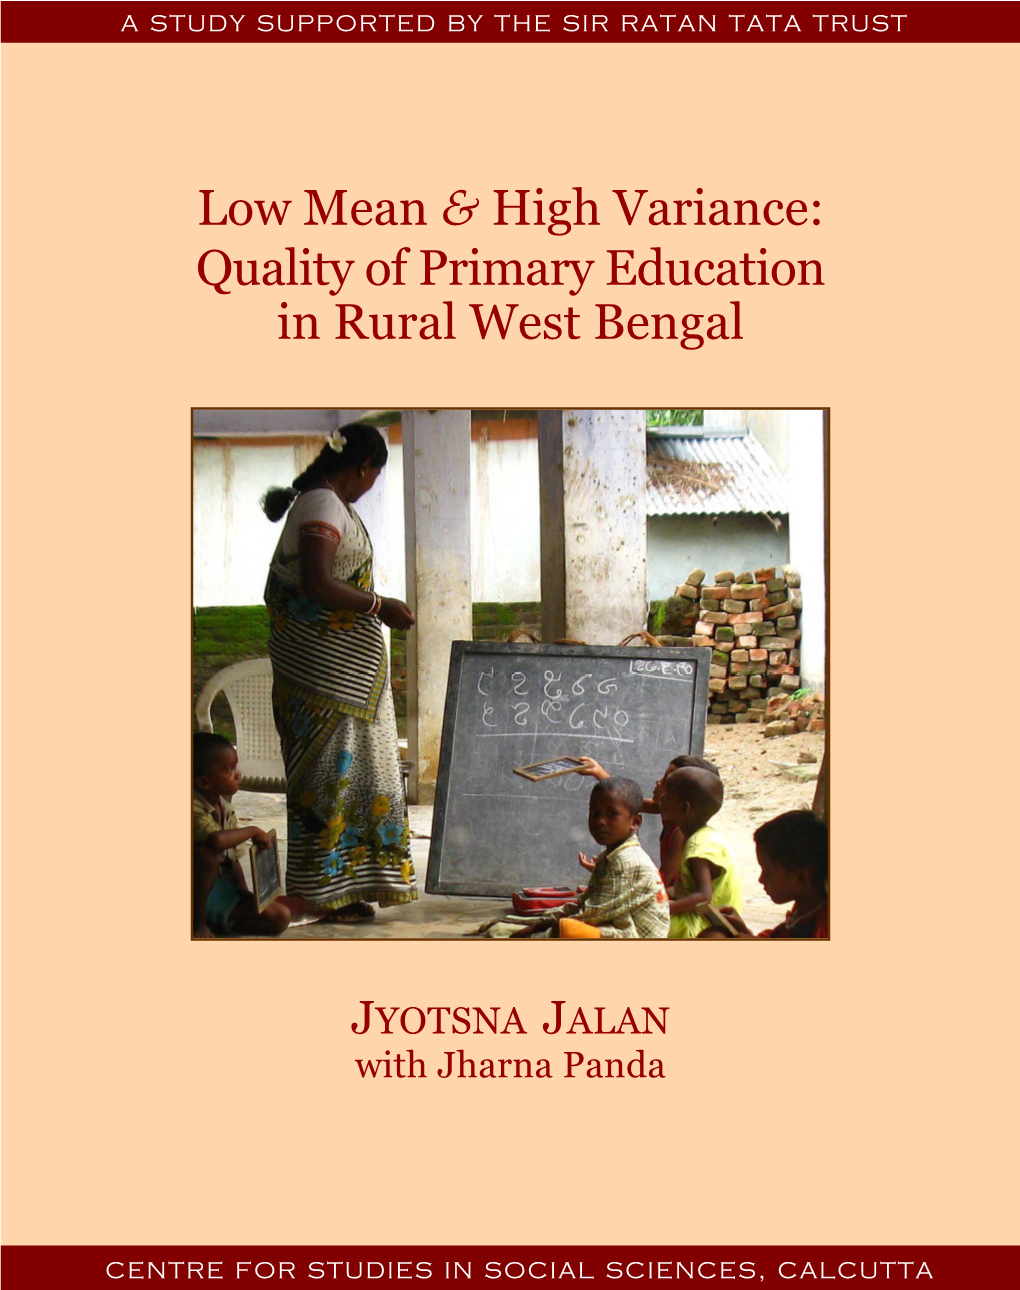 Low Mean & High Variance: Quality of Primary Education in Rural West Bengal